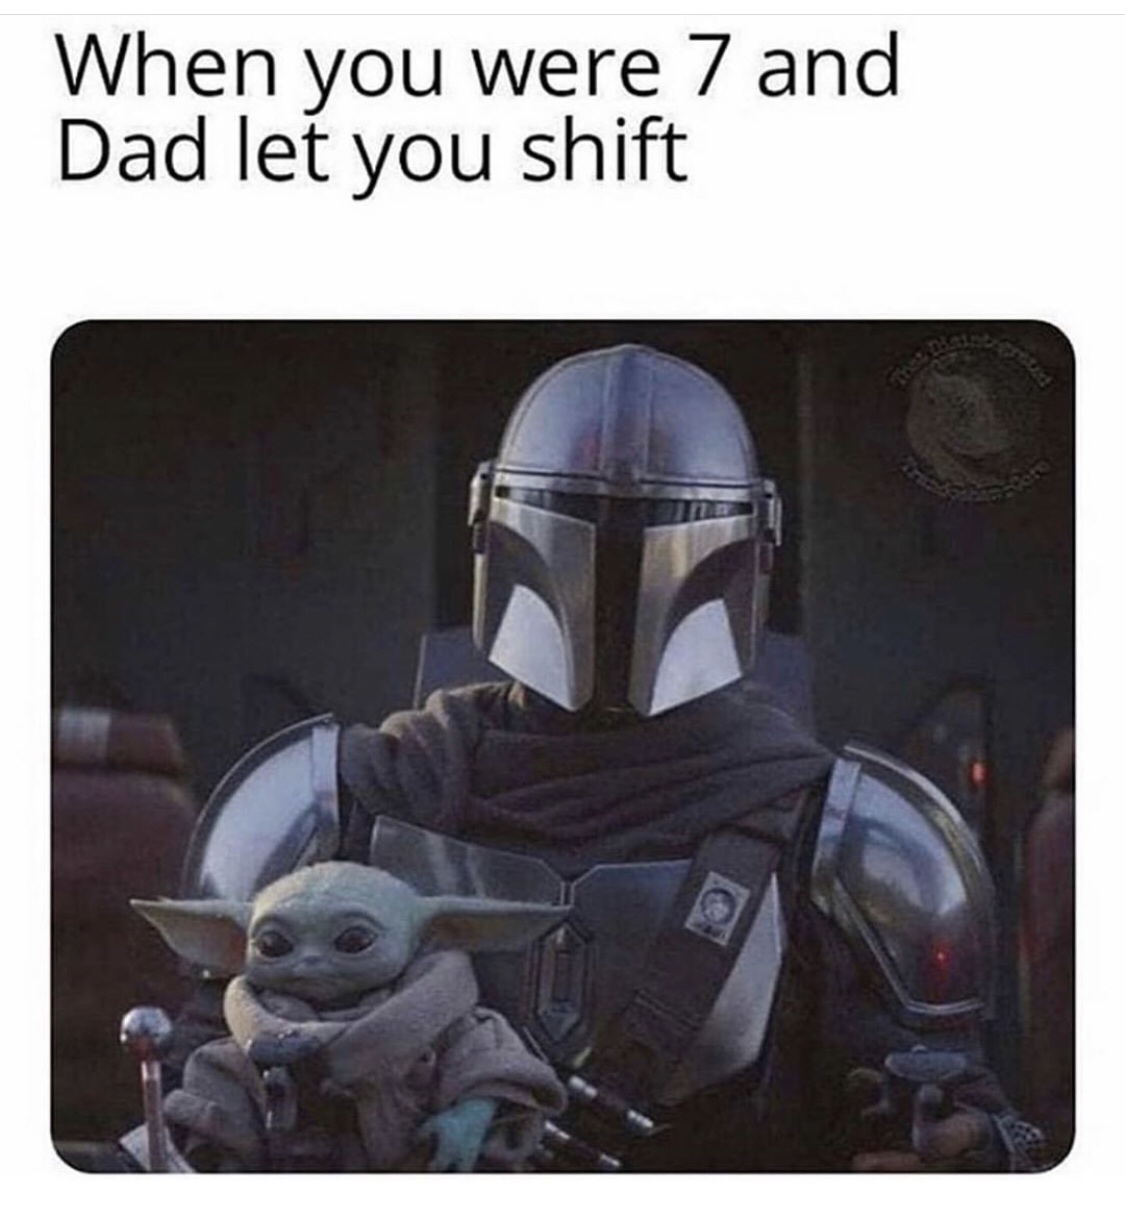 mandalorian ep 4 - When you were 7 and Dad let you shift